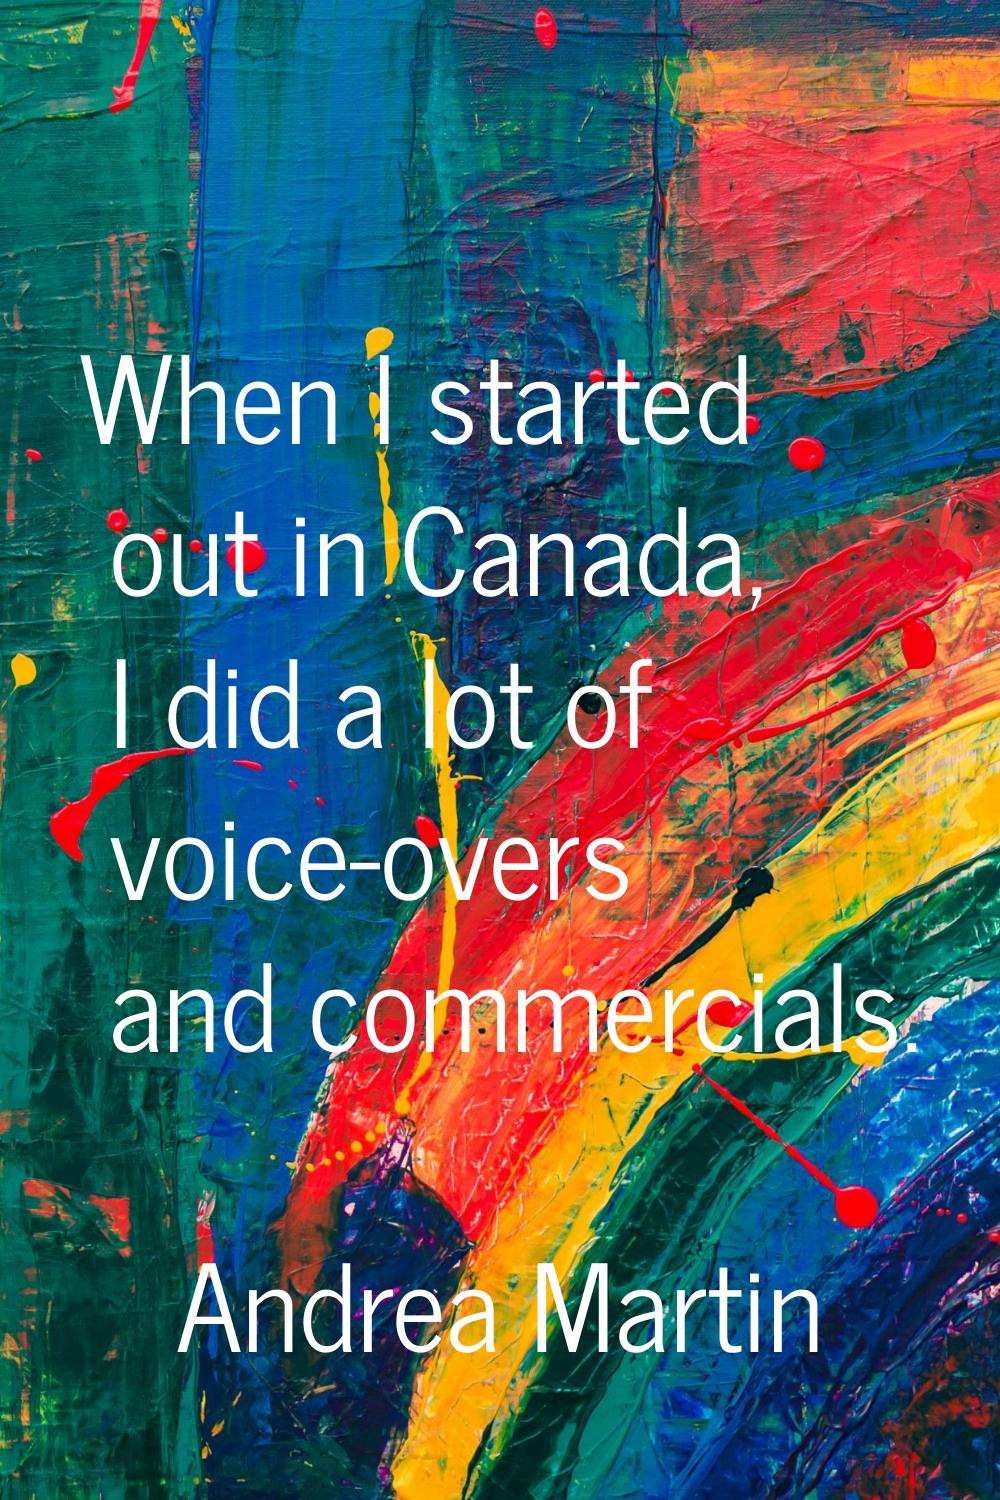 When I started out in Canada, I did a lot of voice-overs and commercials.